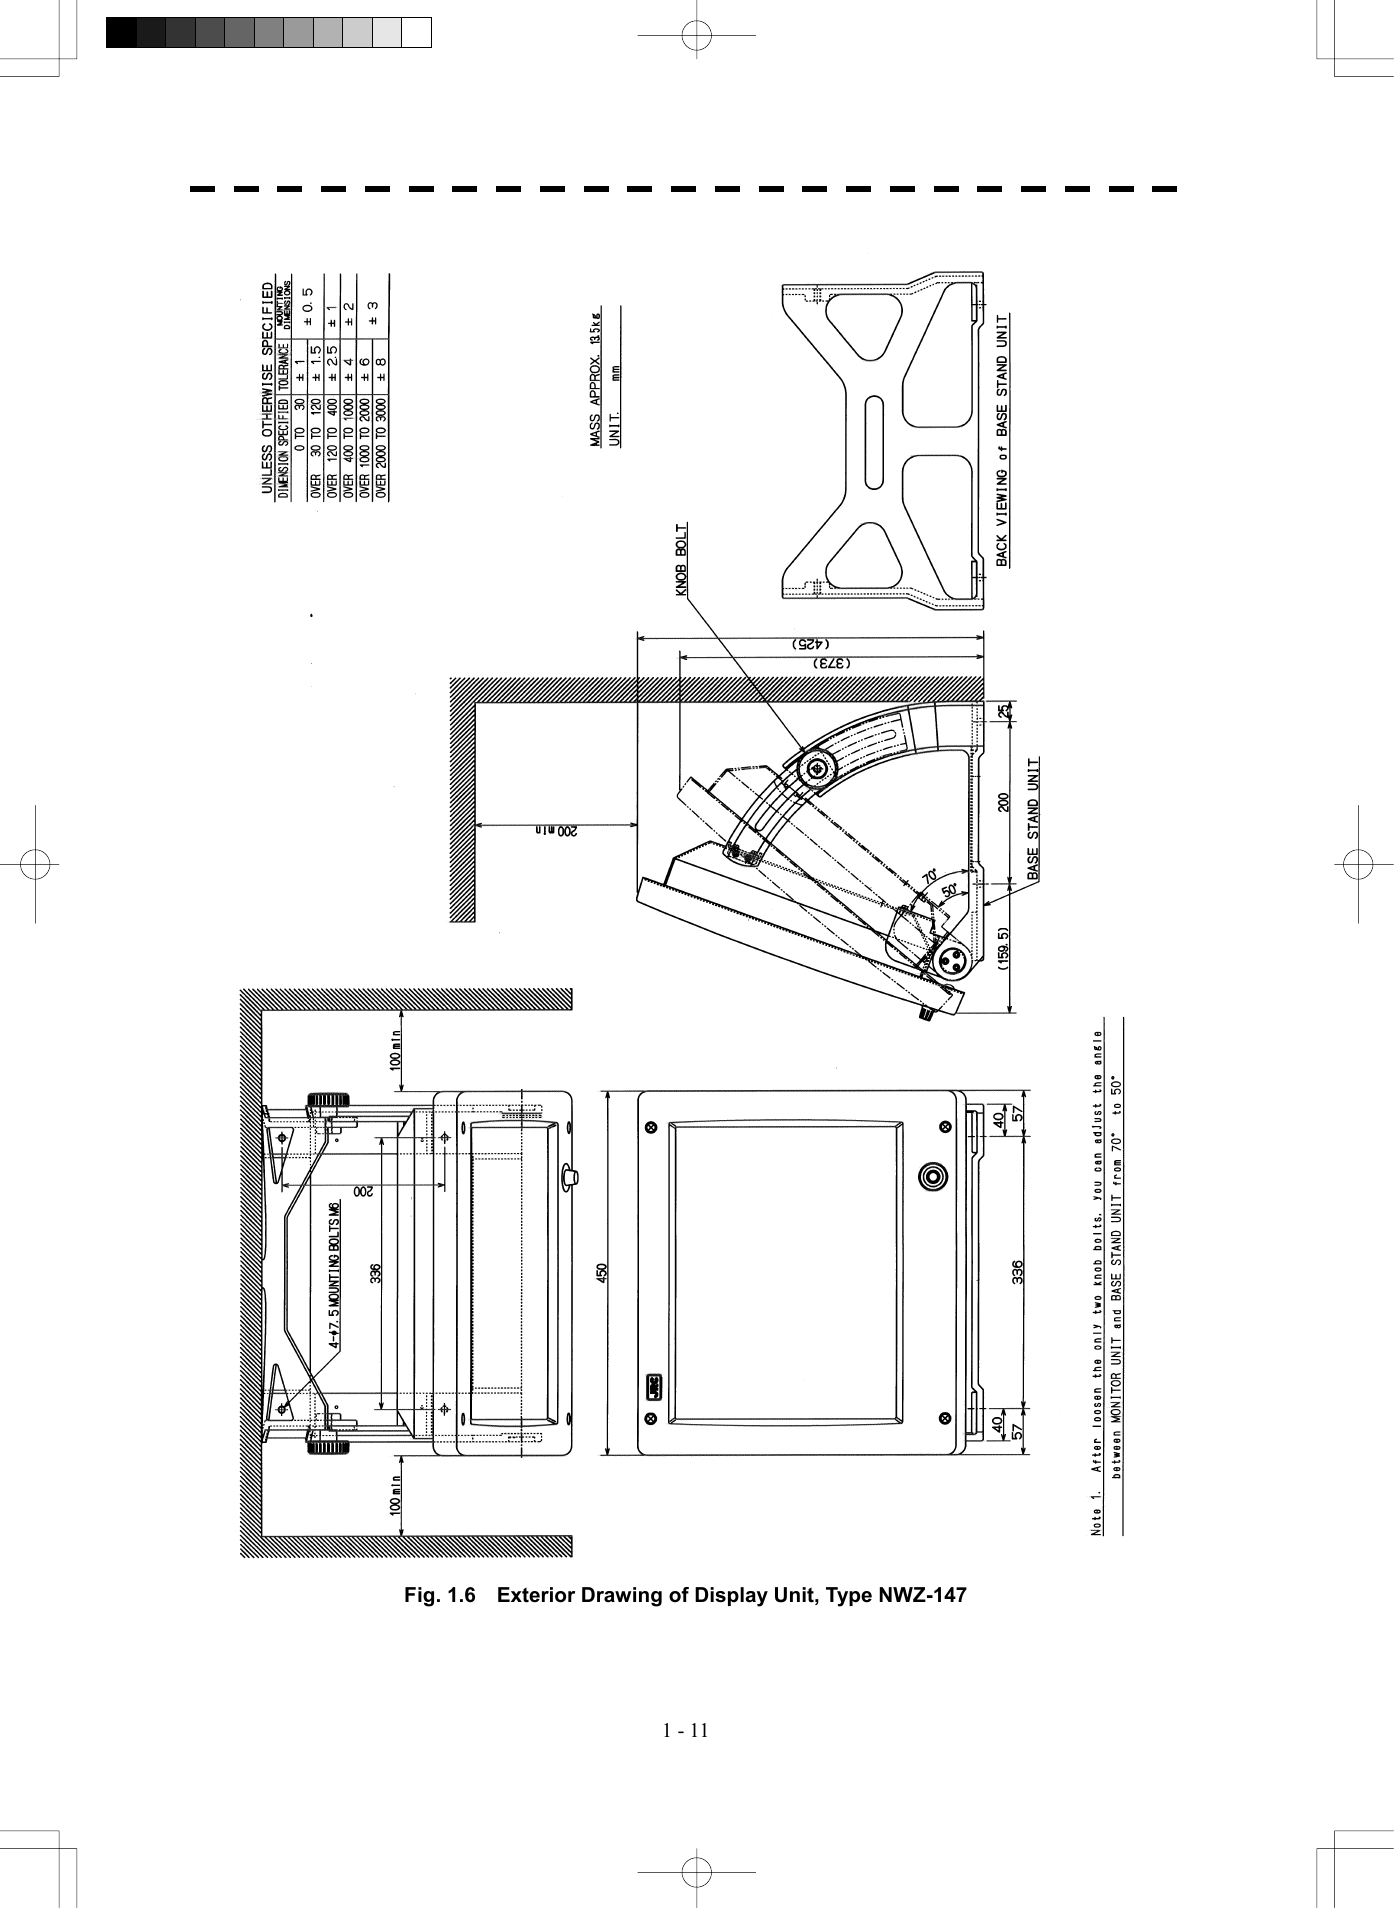   1 - 11    Fig. 1.6    Exterior Drawing of Display Unit, Type NWZ-147  